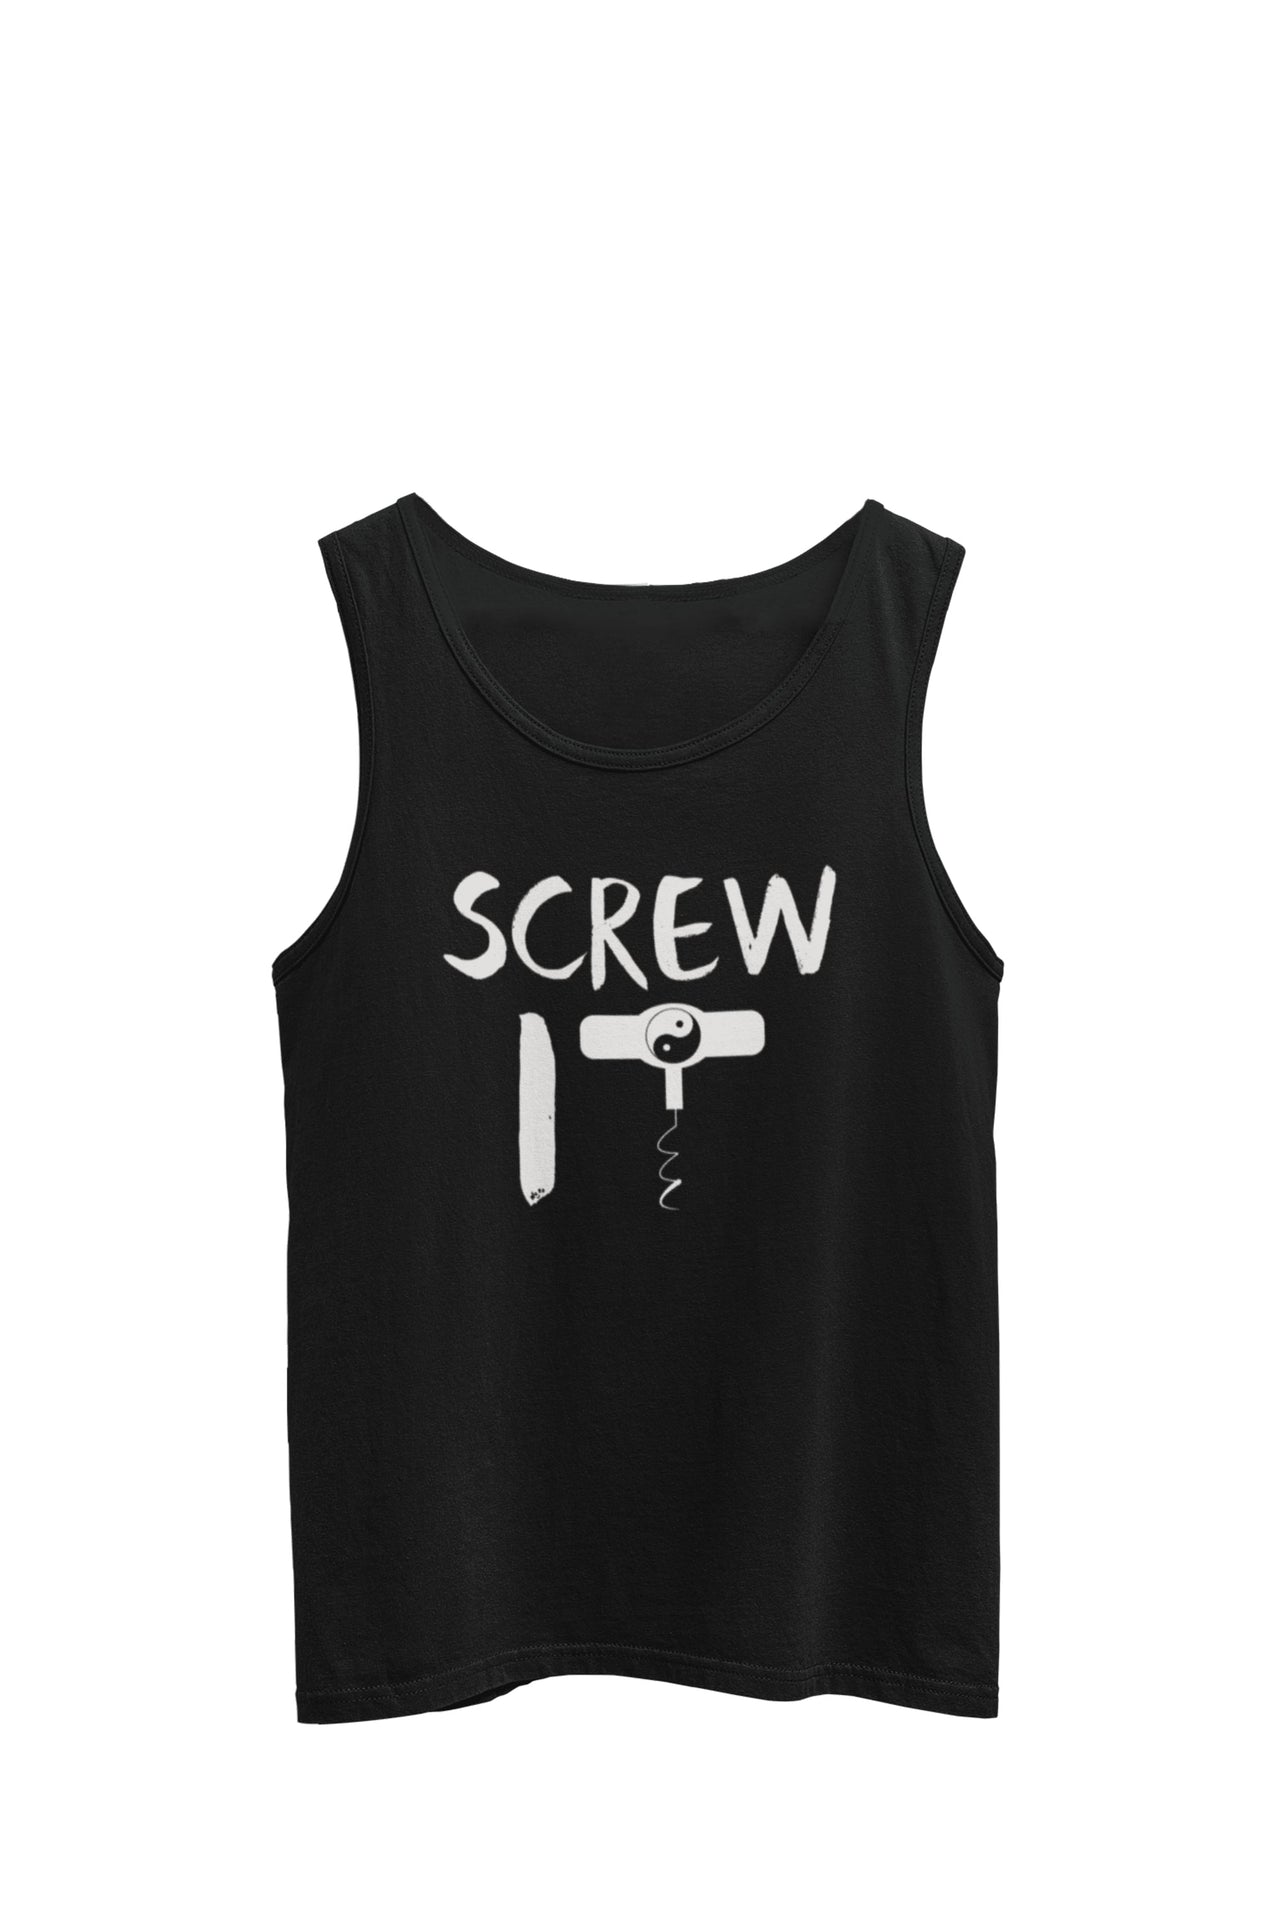 Black tank top tee with text 'screw it' and a cork screw T forming a yin yang symbol, by WooHoo Apparel.